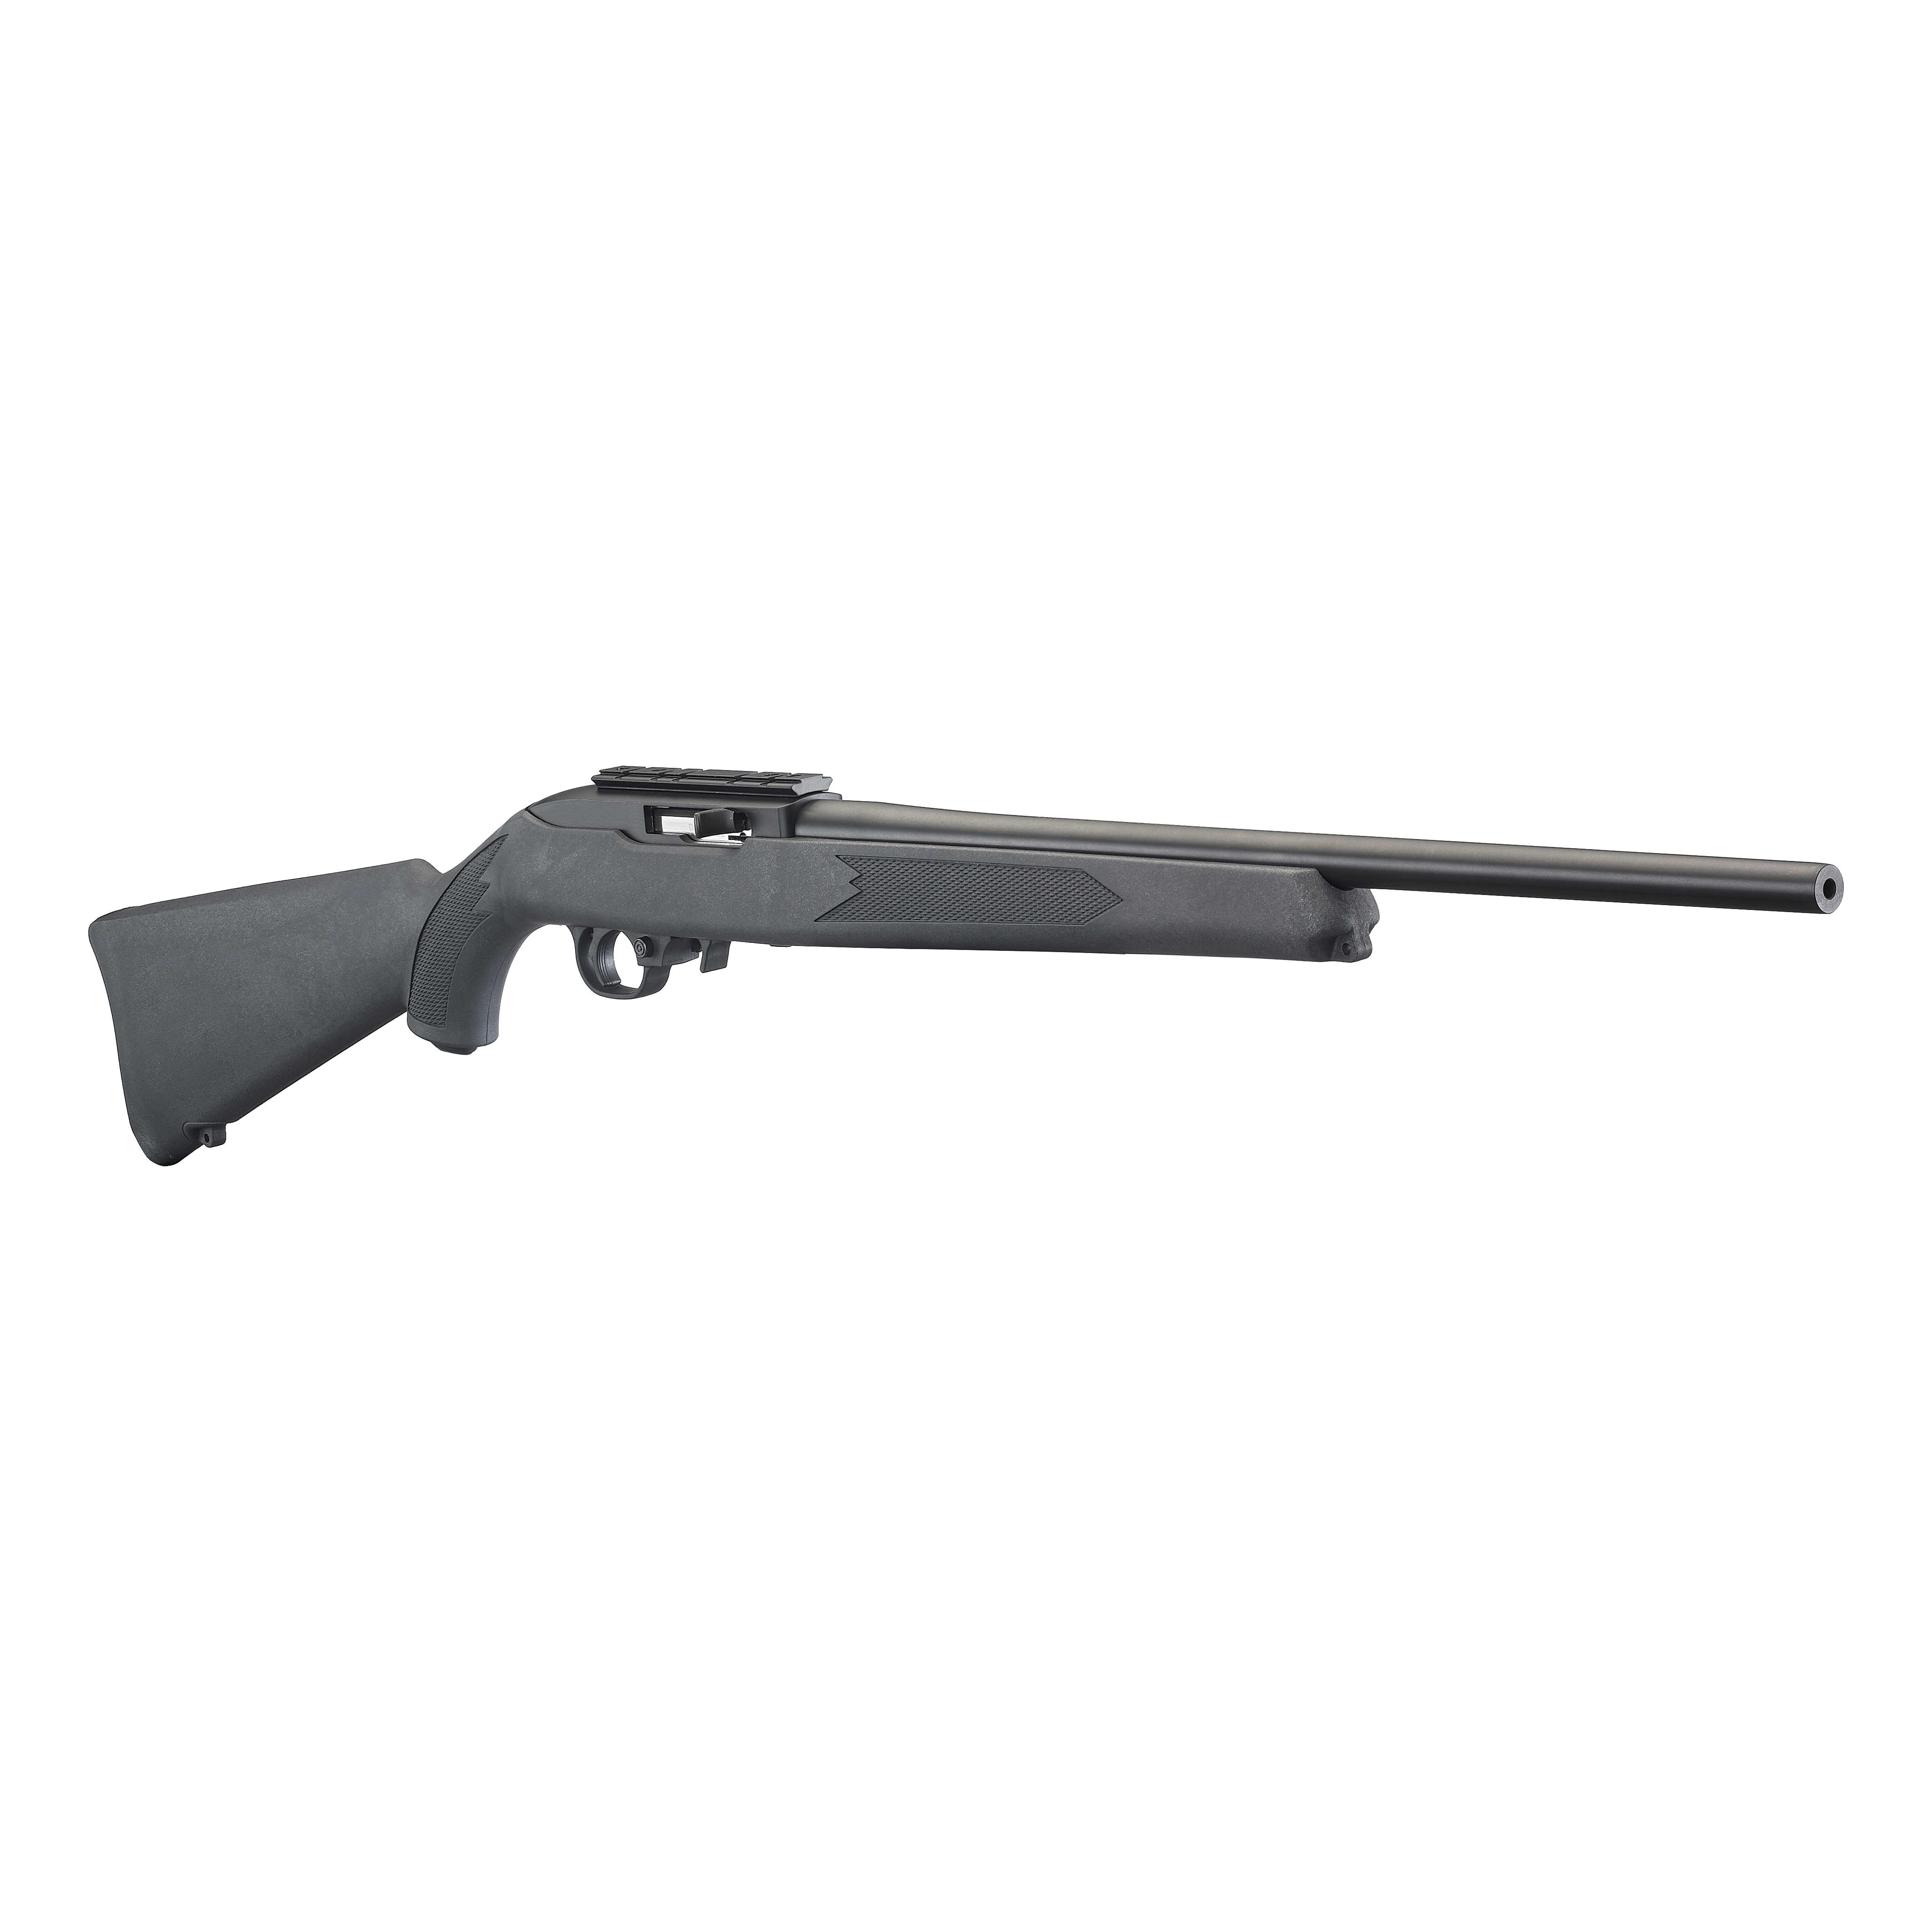 Ruger® 10/22® Carbine Semi-Auto Rifle - Charcoal - Angle View